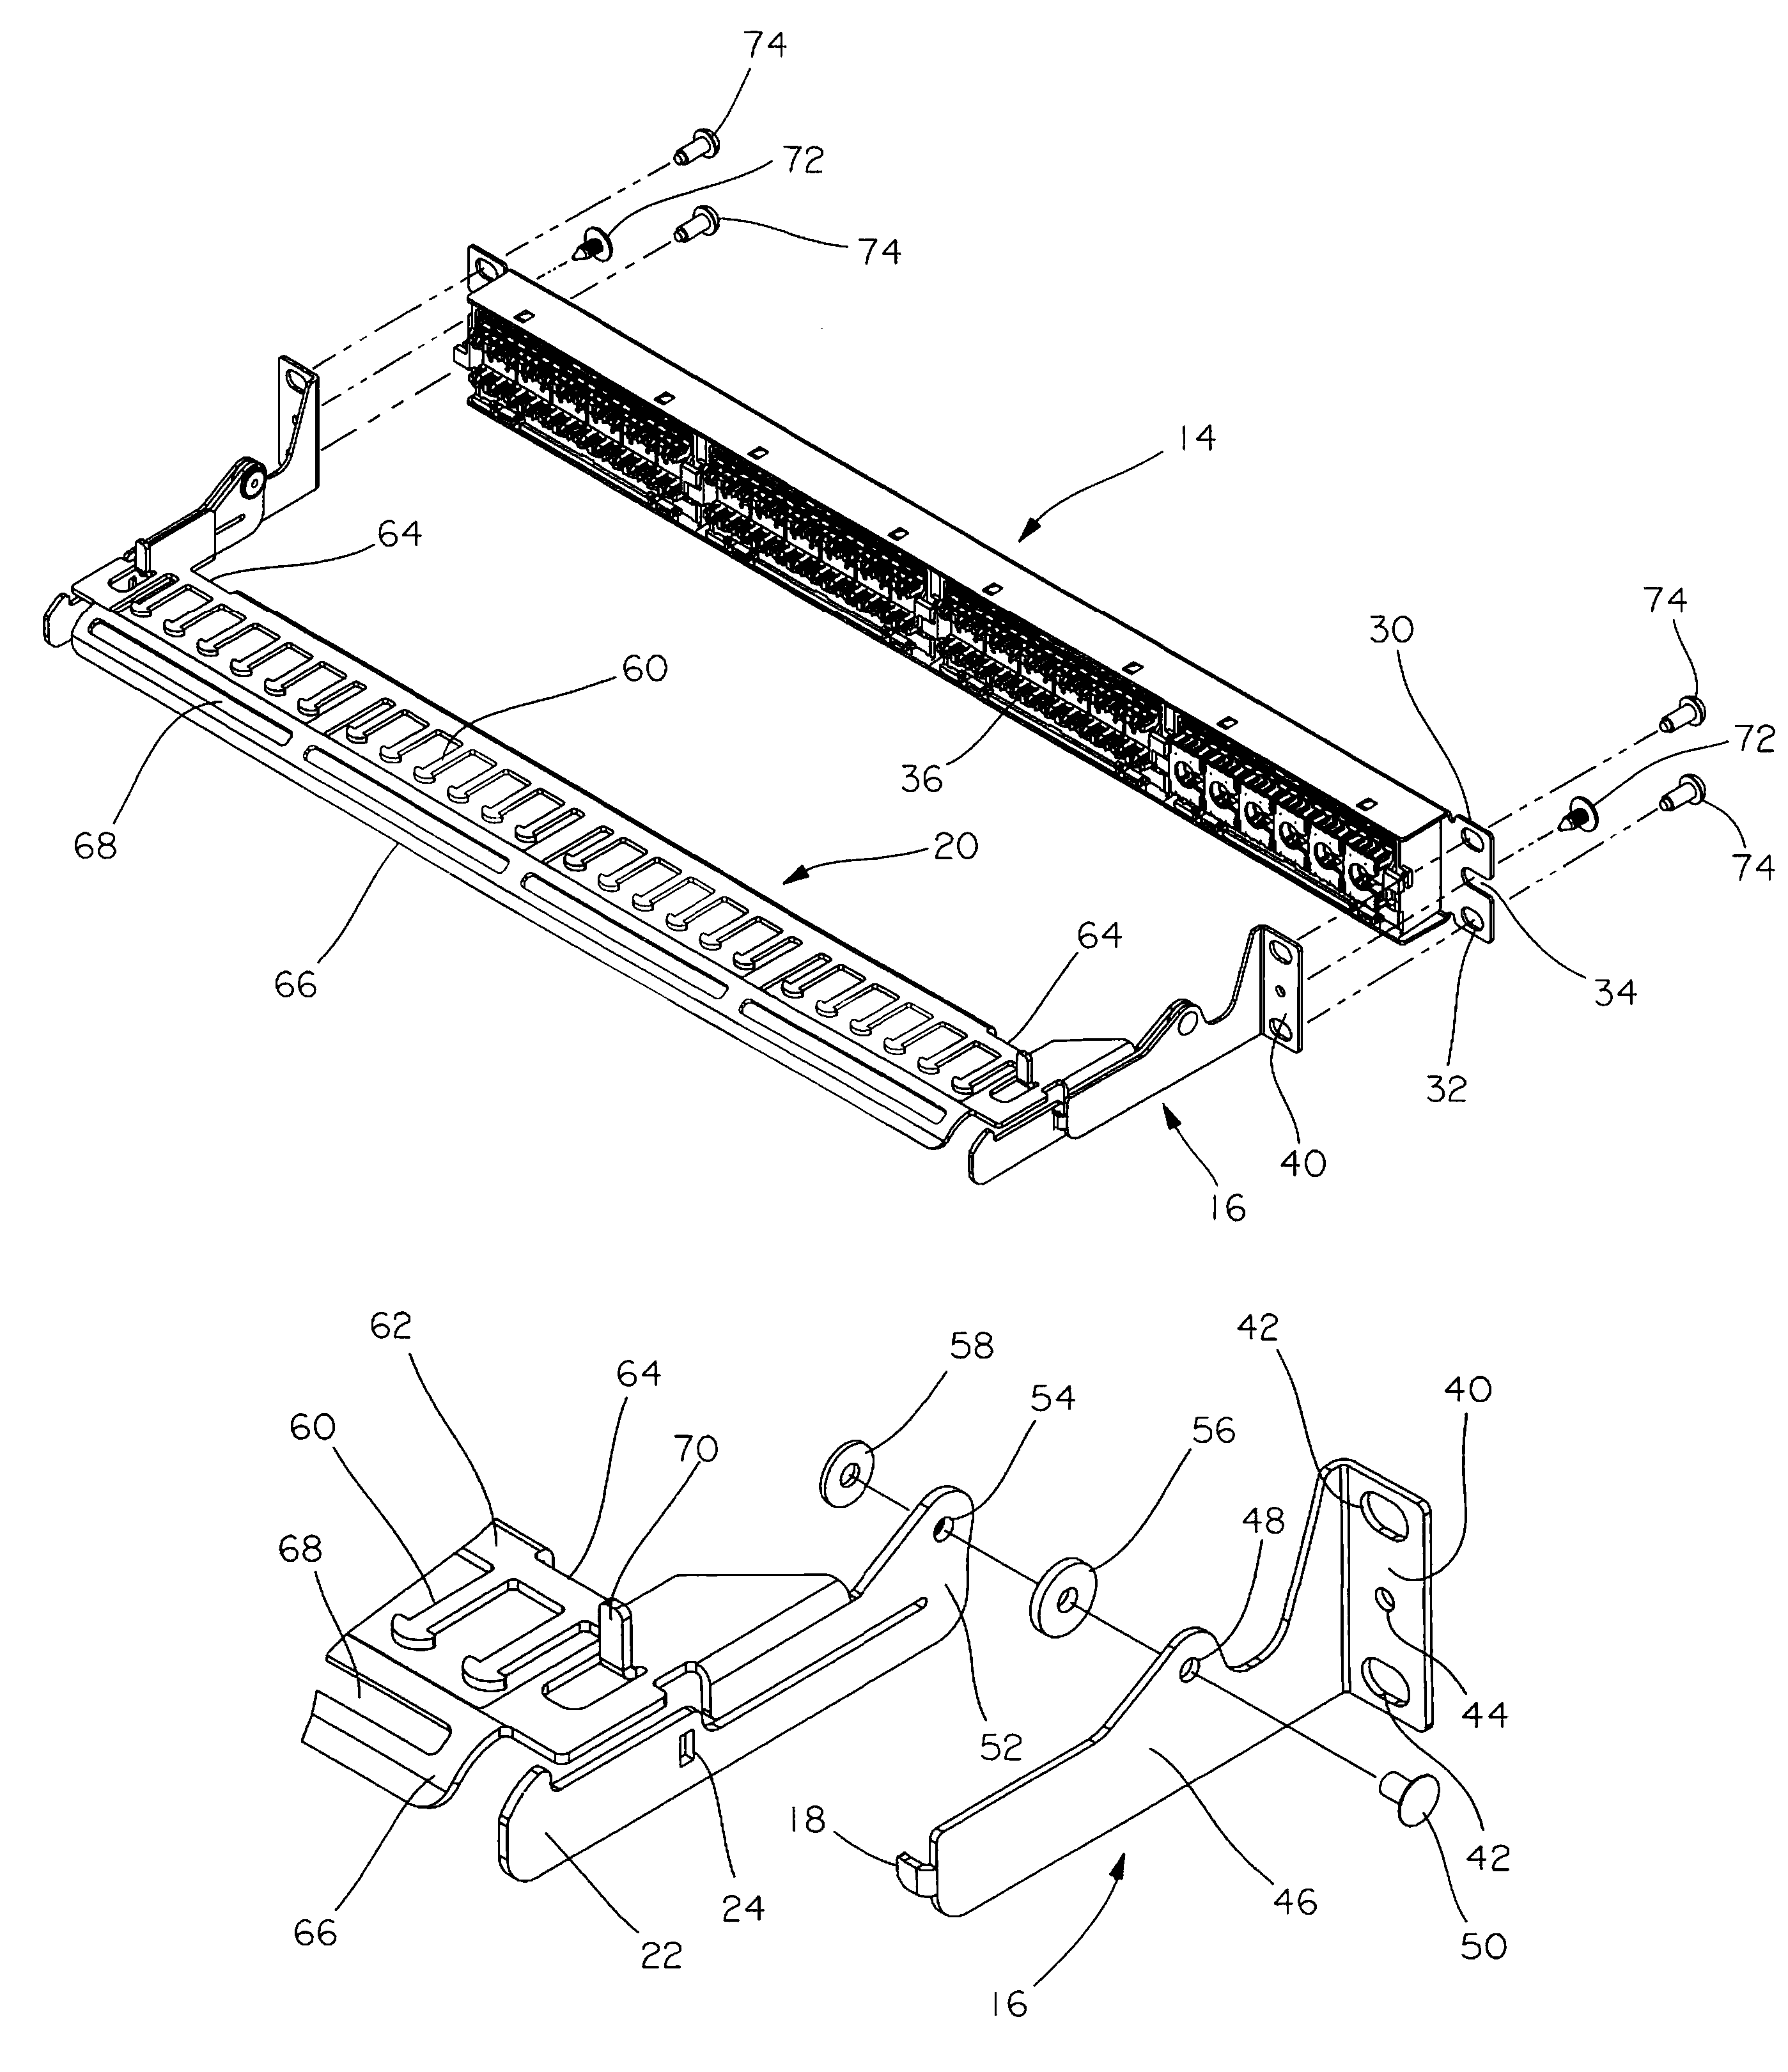 Pivoting strain relief bar for data patch panels